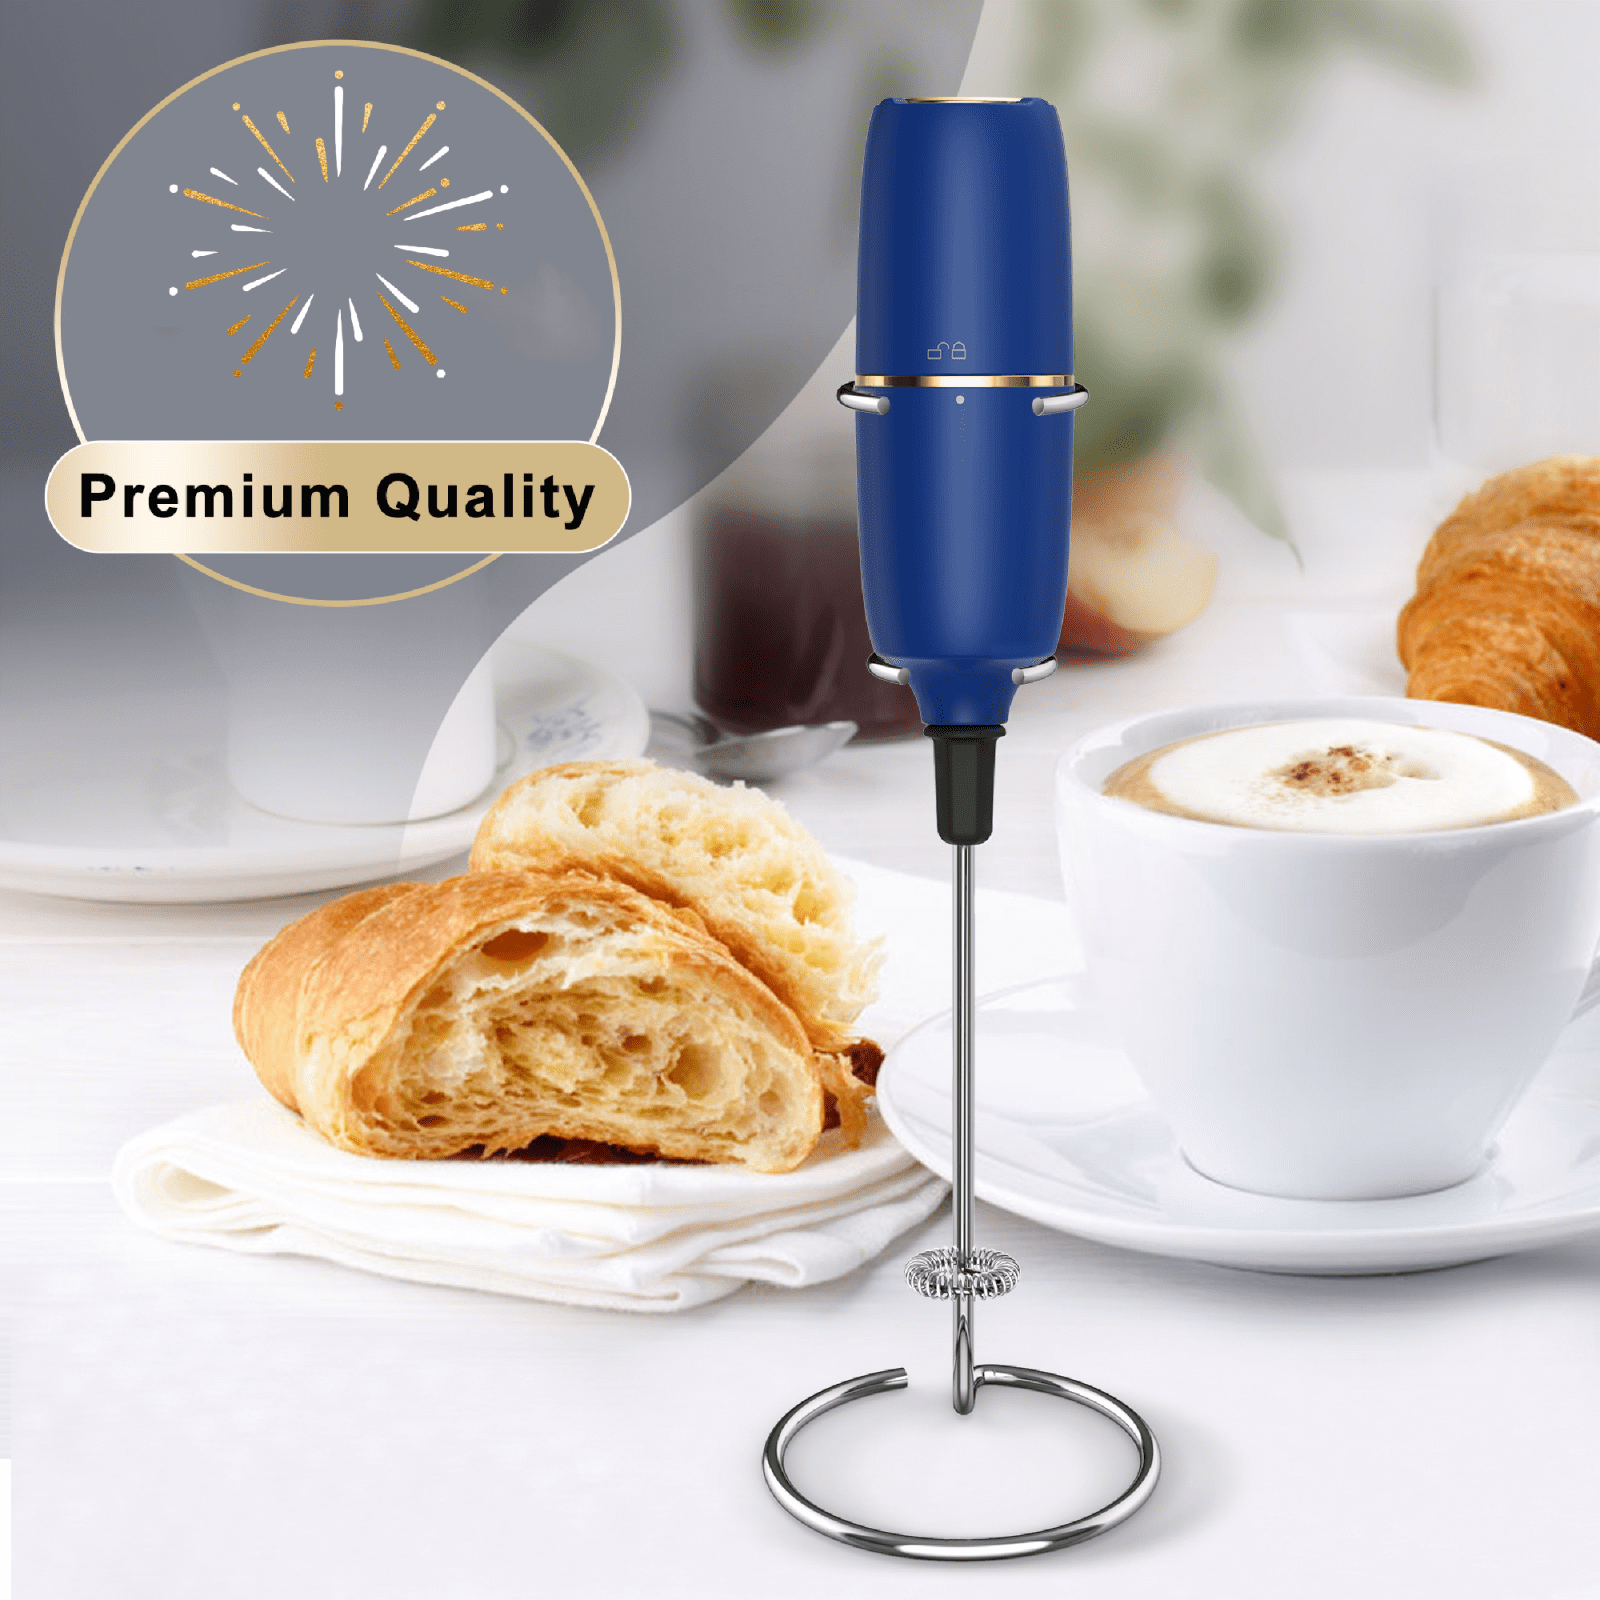 Qucoqpe Electric Milk Frother, Handheld Battery Milk Foam Maker for Bulletproof Coffee, Matcha, Hot Chocolate Stainless Steel Whisk Battery Operated